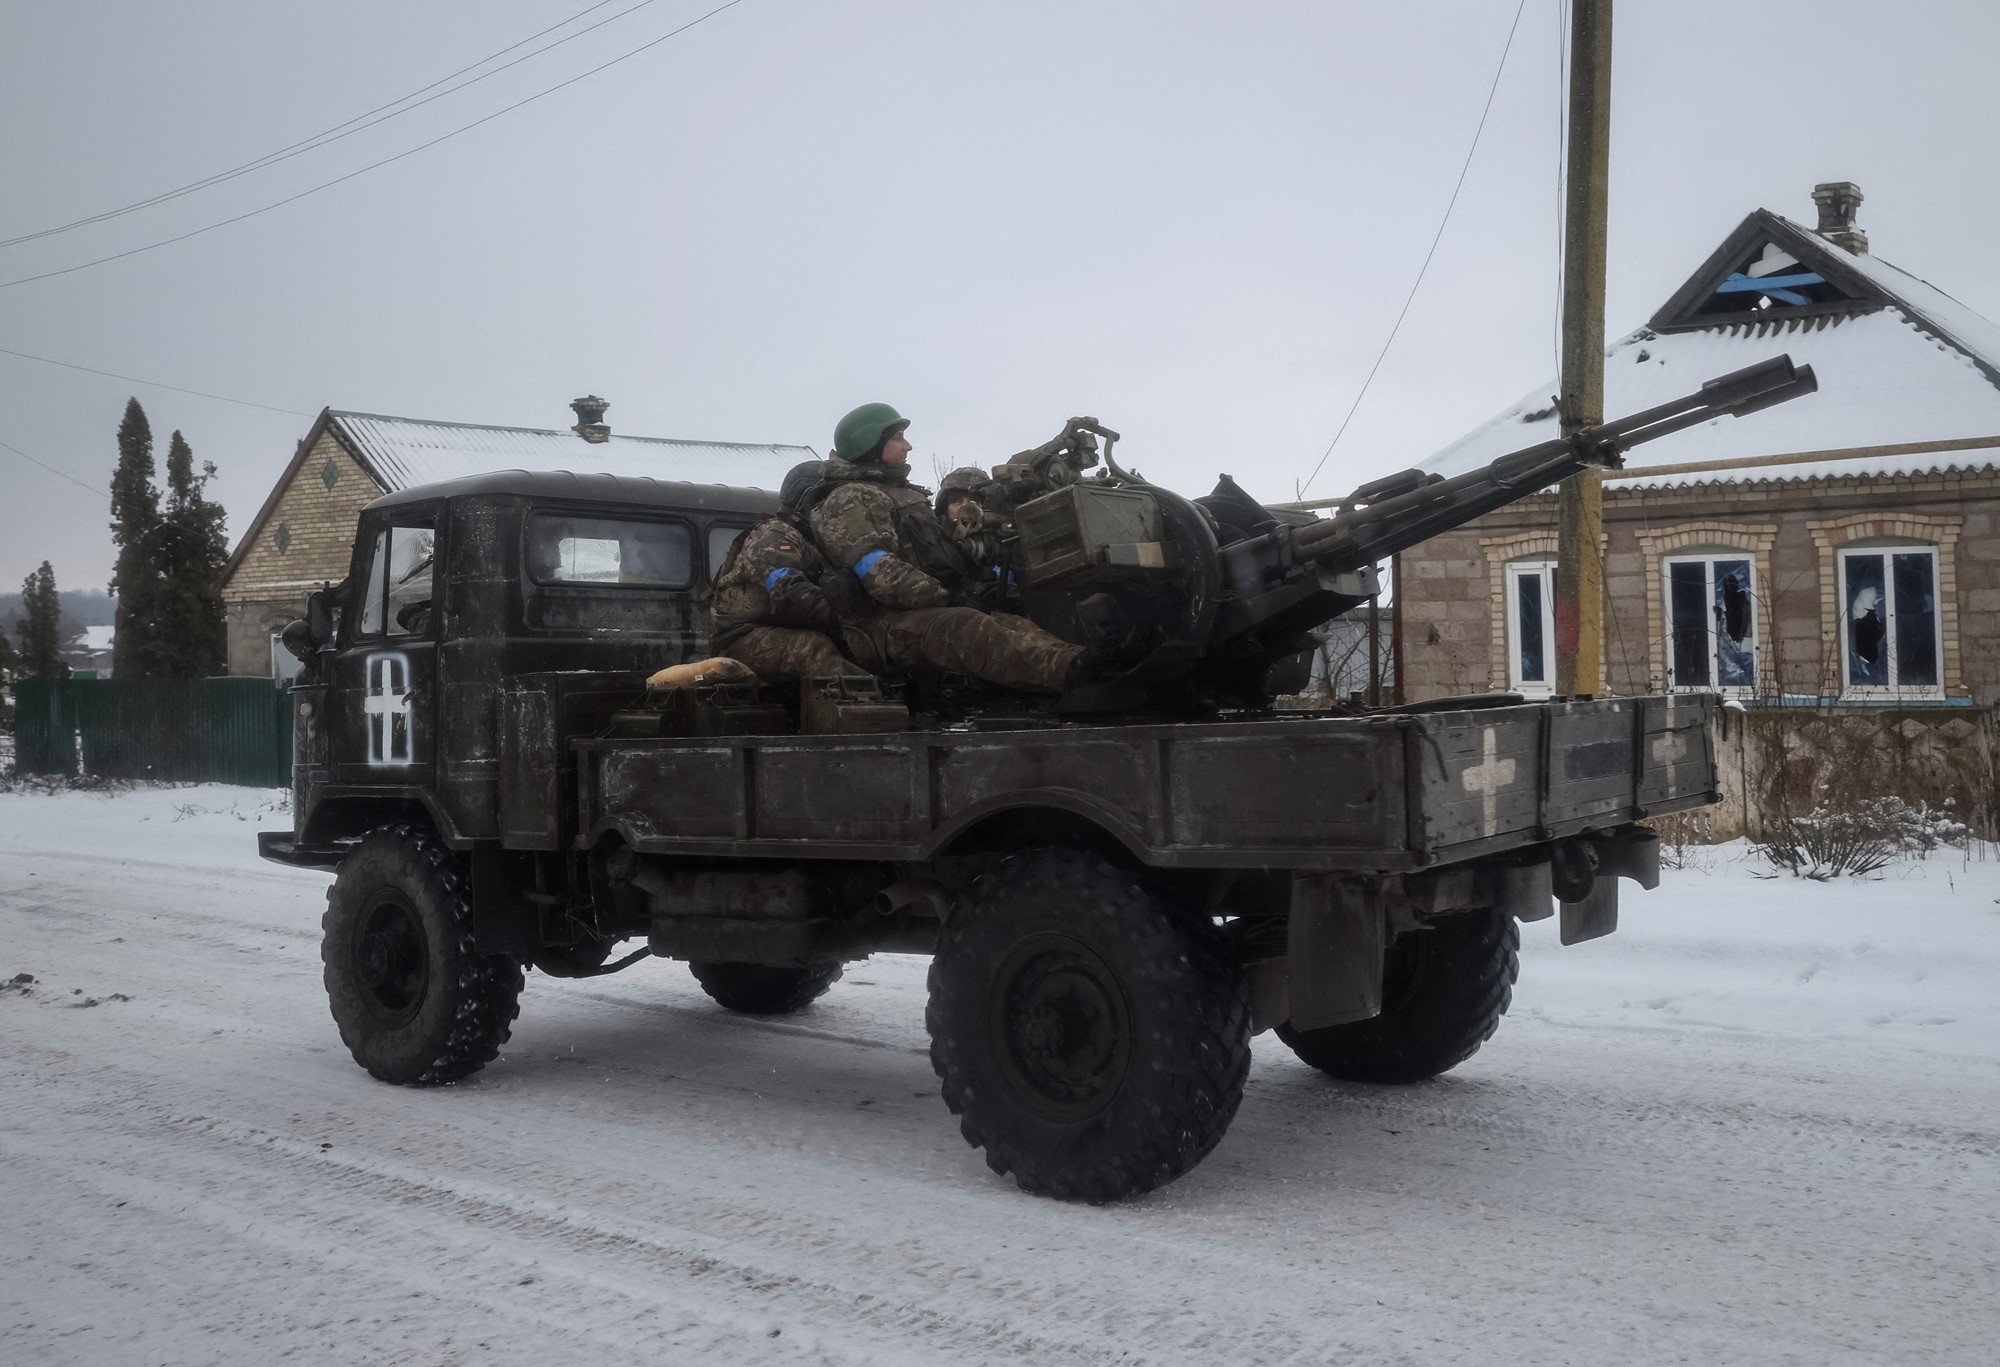 Ukrainian servicemen ride on a military vehicle with a ZU-23-2 anti-aircraft cannon.